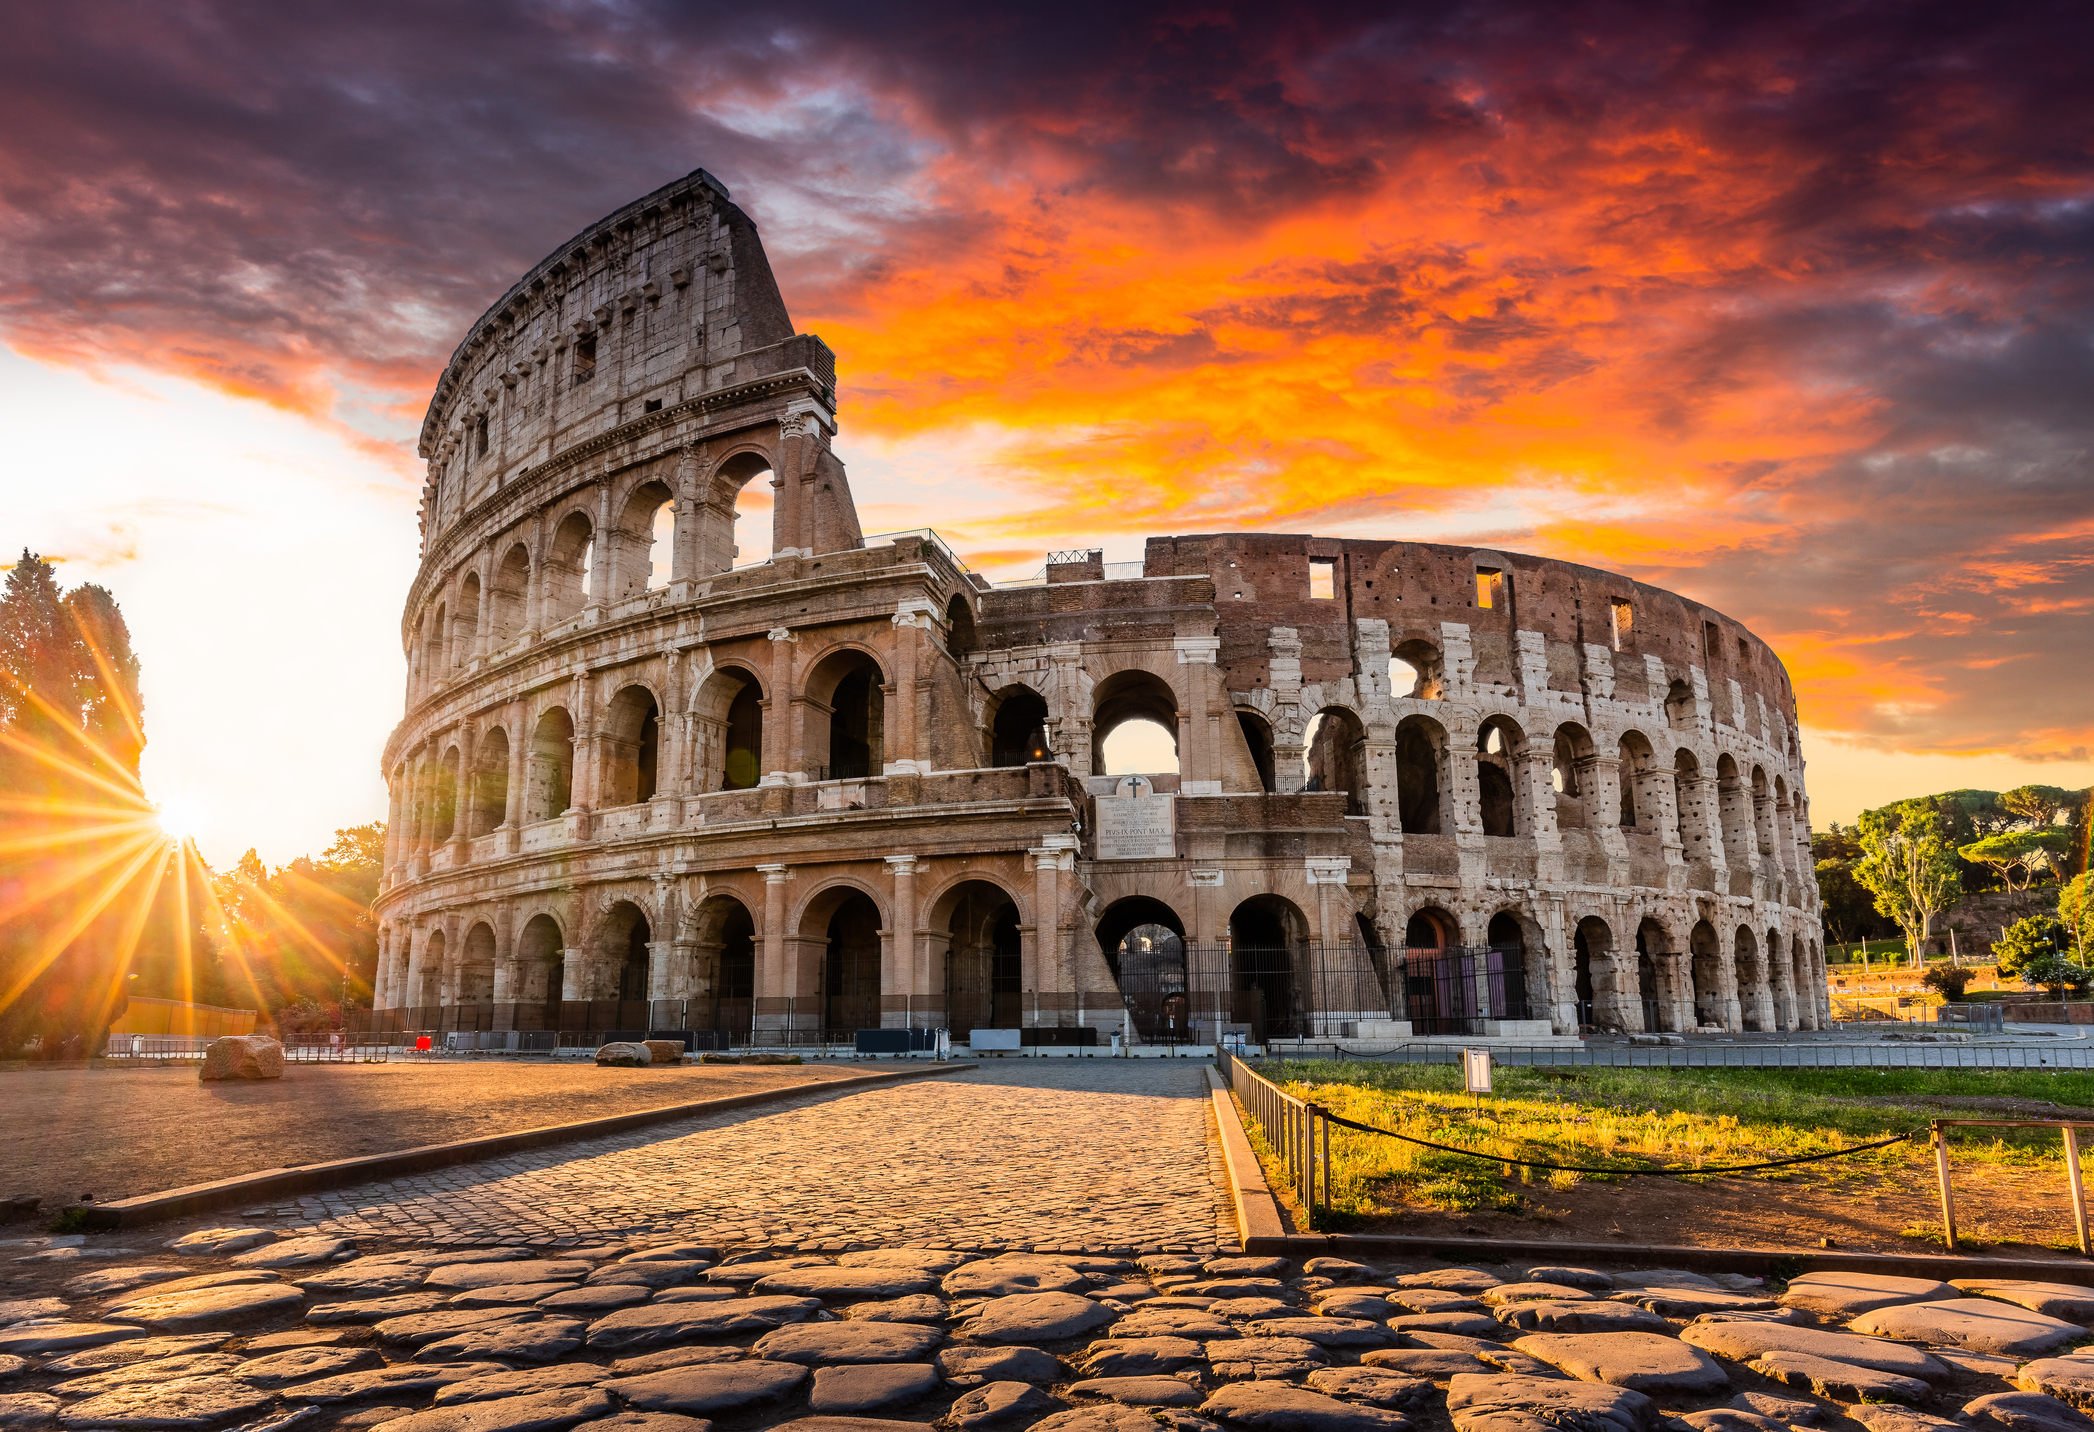 7-night Rome, Florence & Venice tour with air from $985